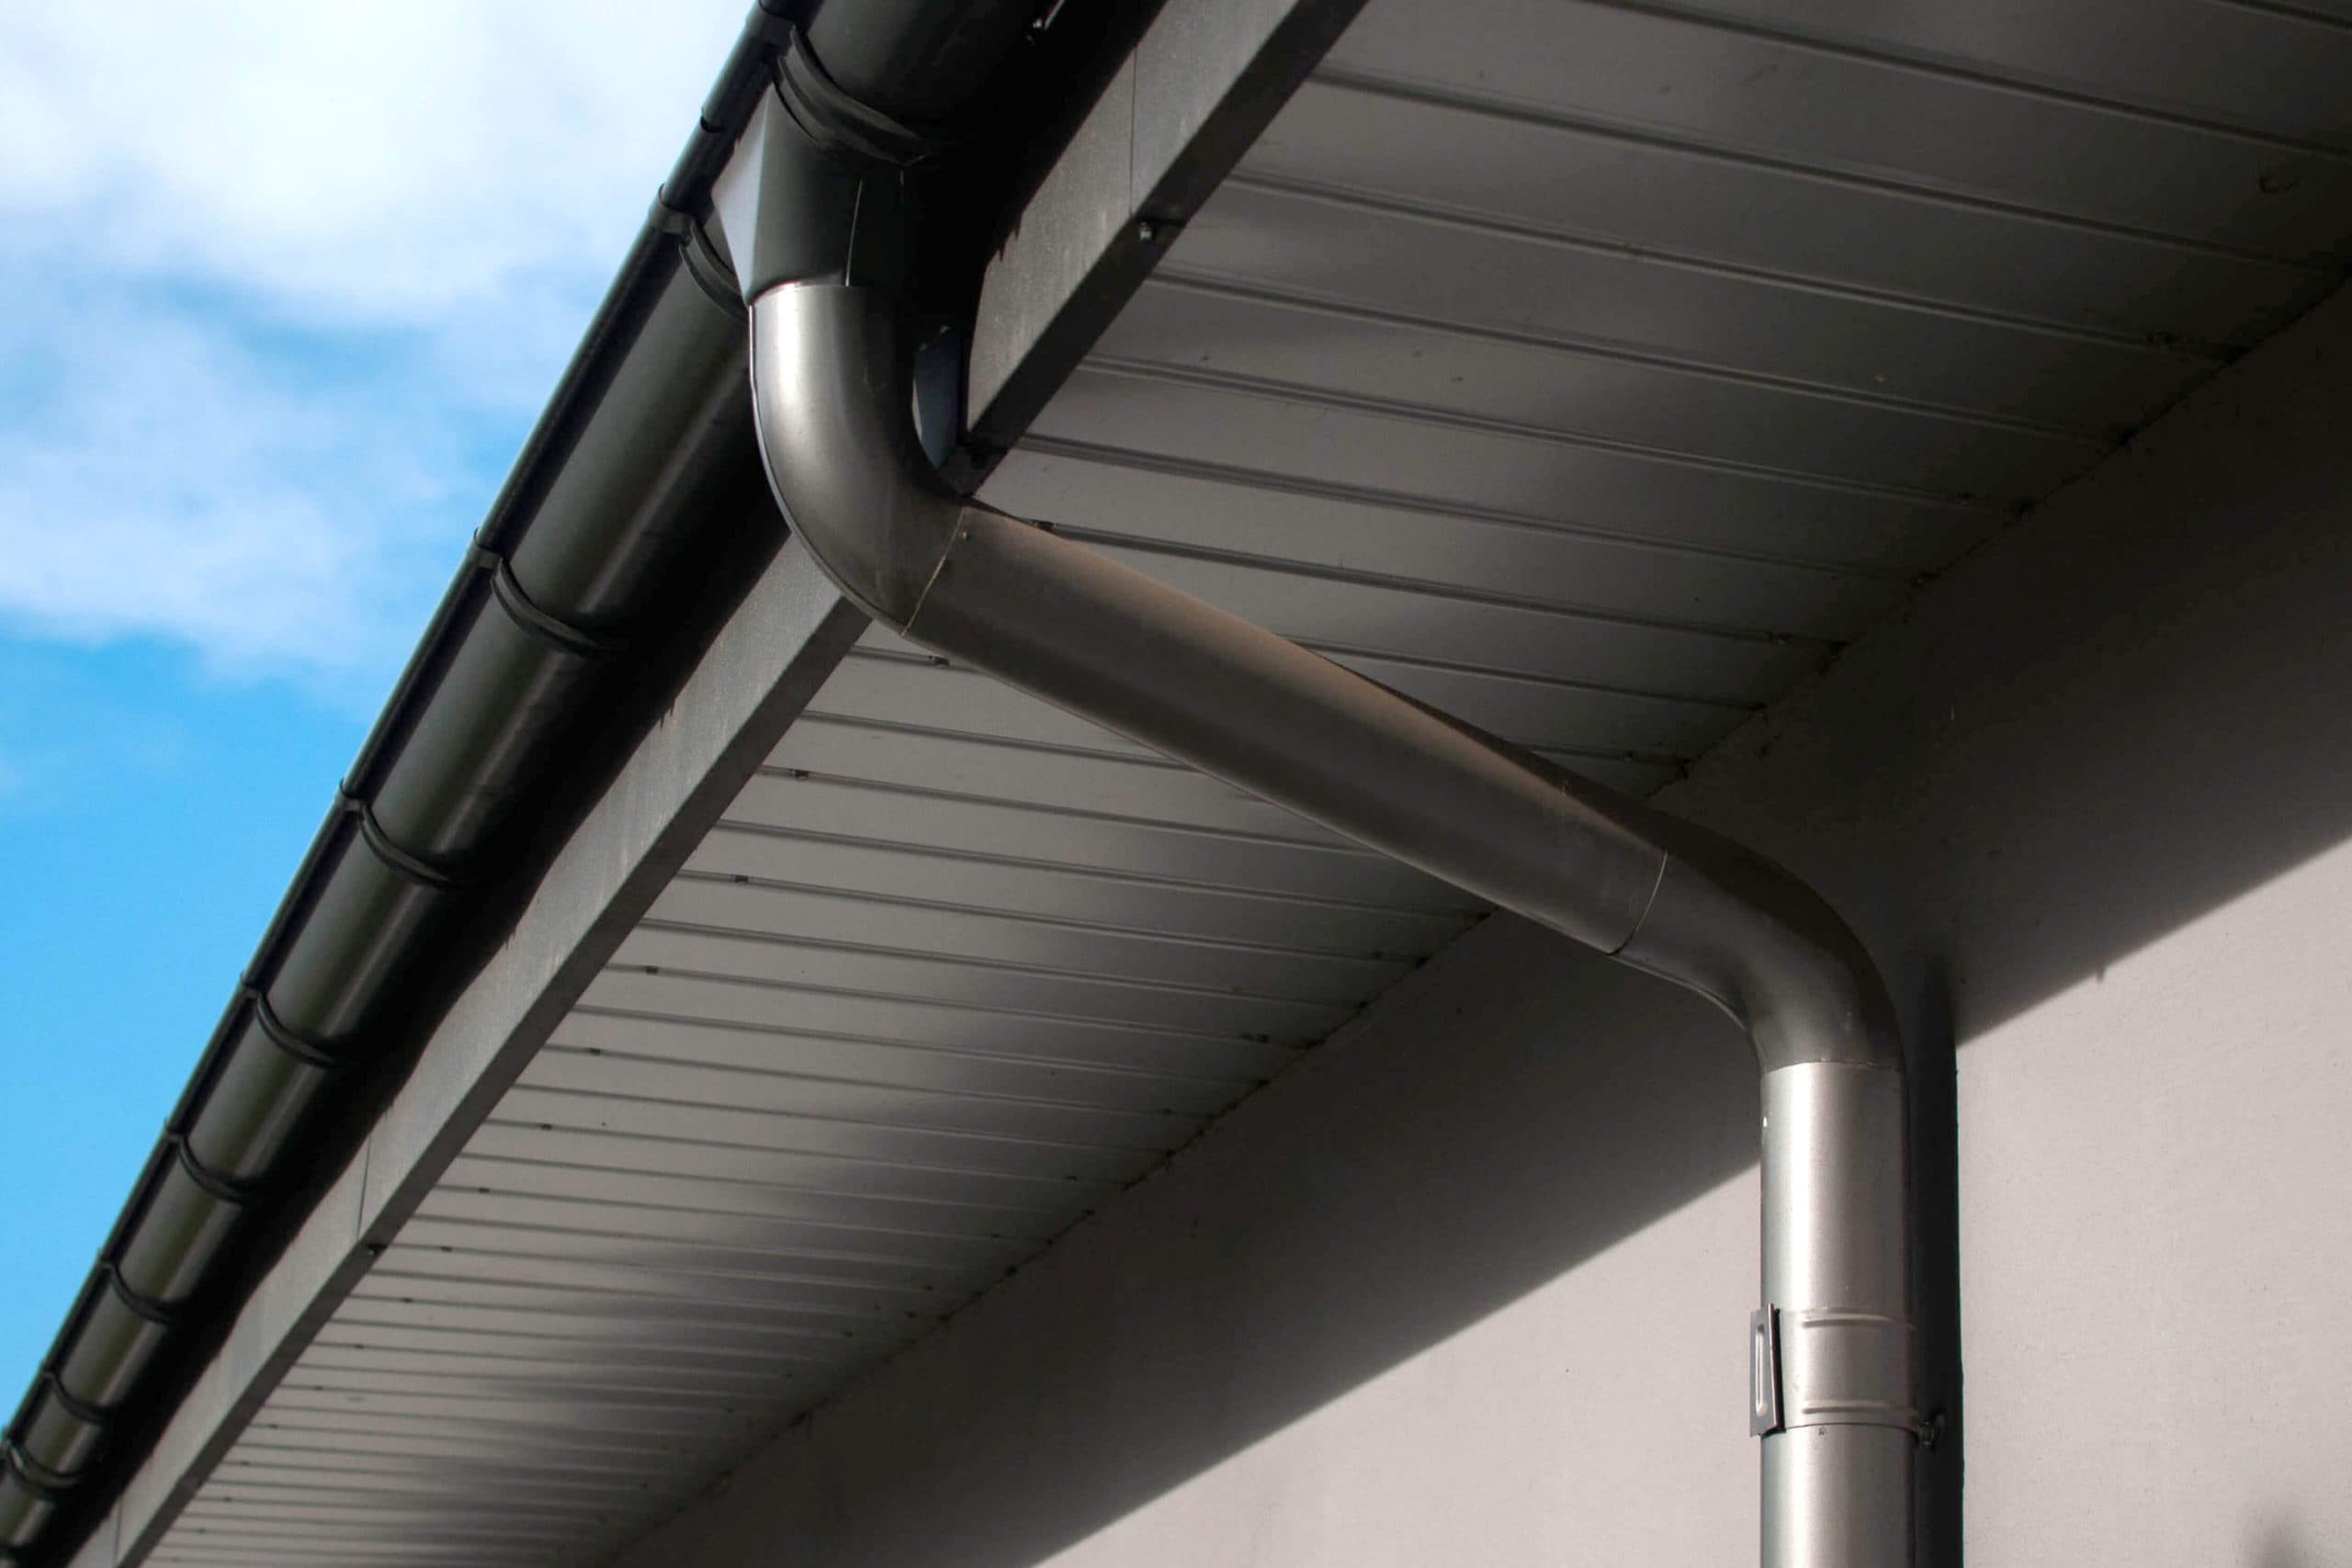 Reliable and affordable Galvanized gutters installation in Buffalo